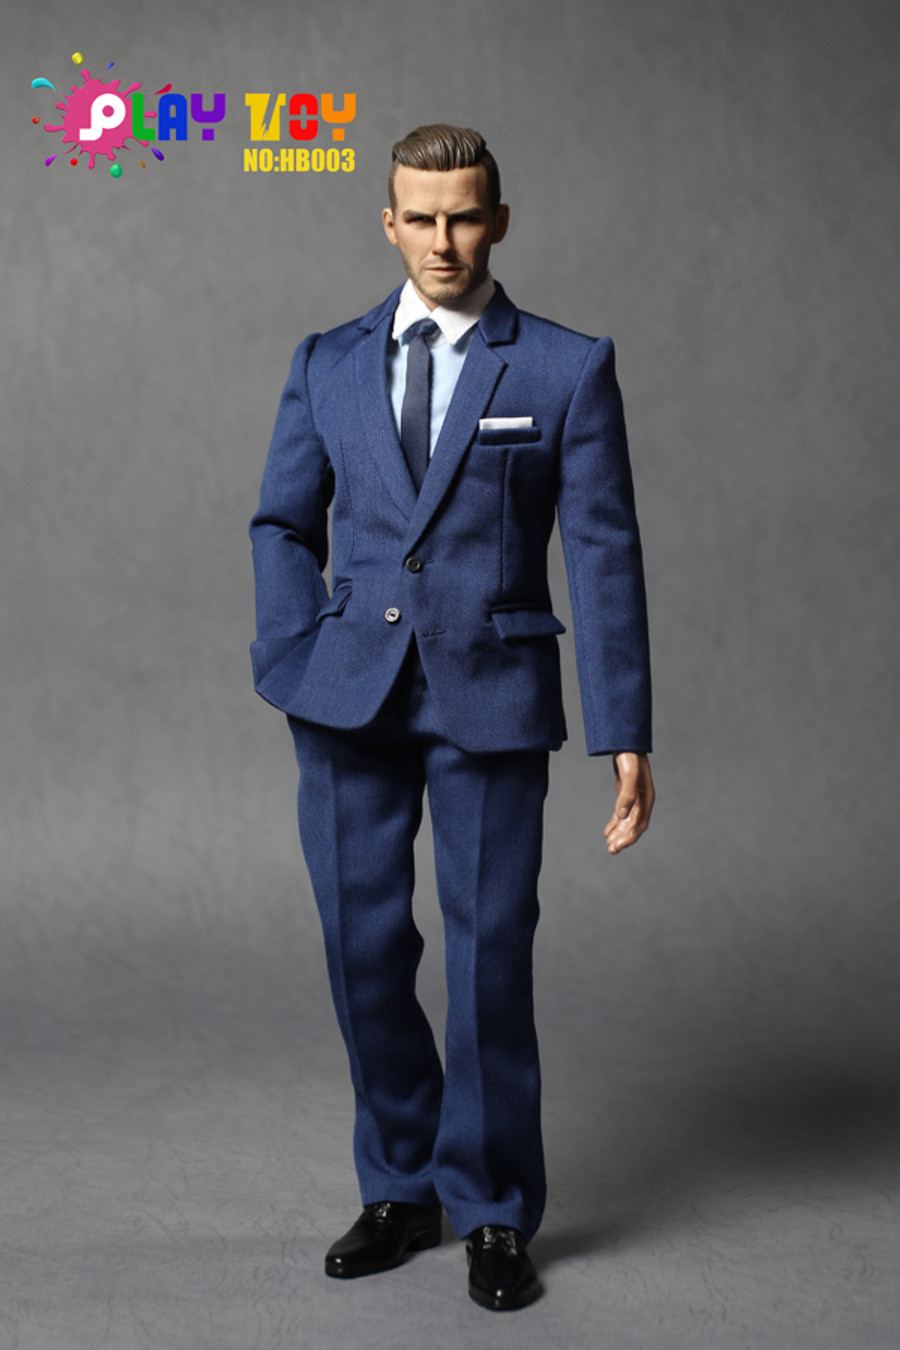 Play Toy - Stylish Man in Suit